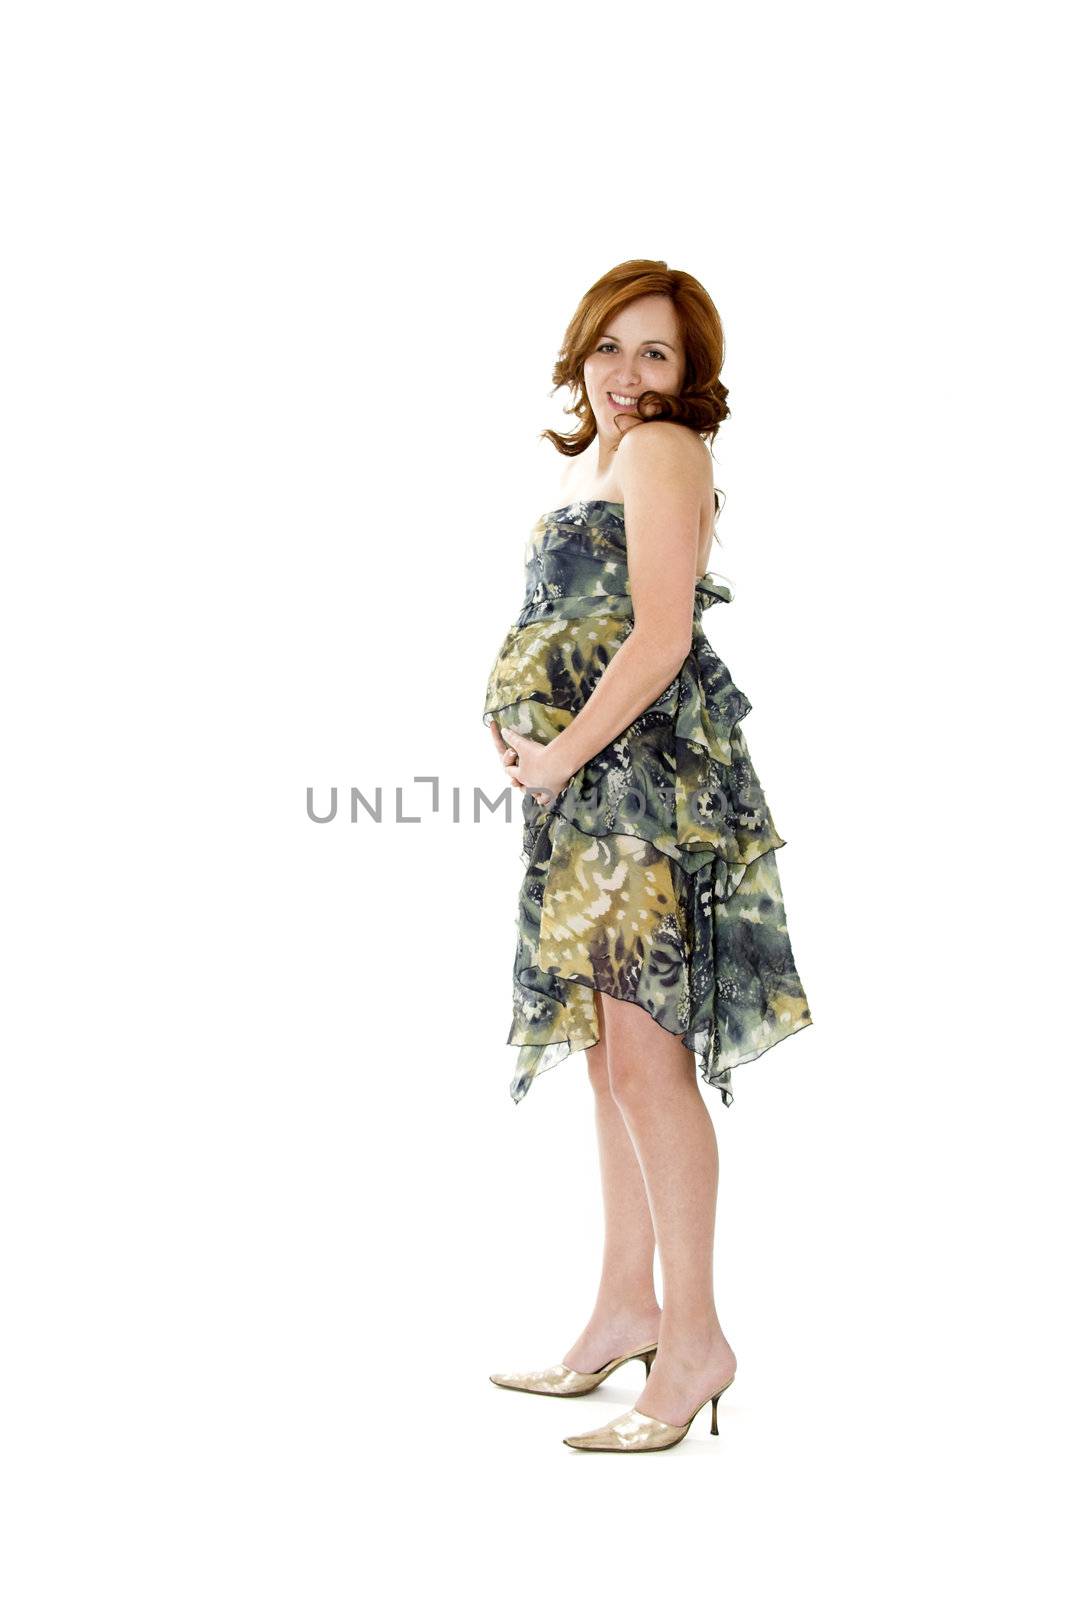 Pregnant woman posing on white with beautiful dress